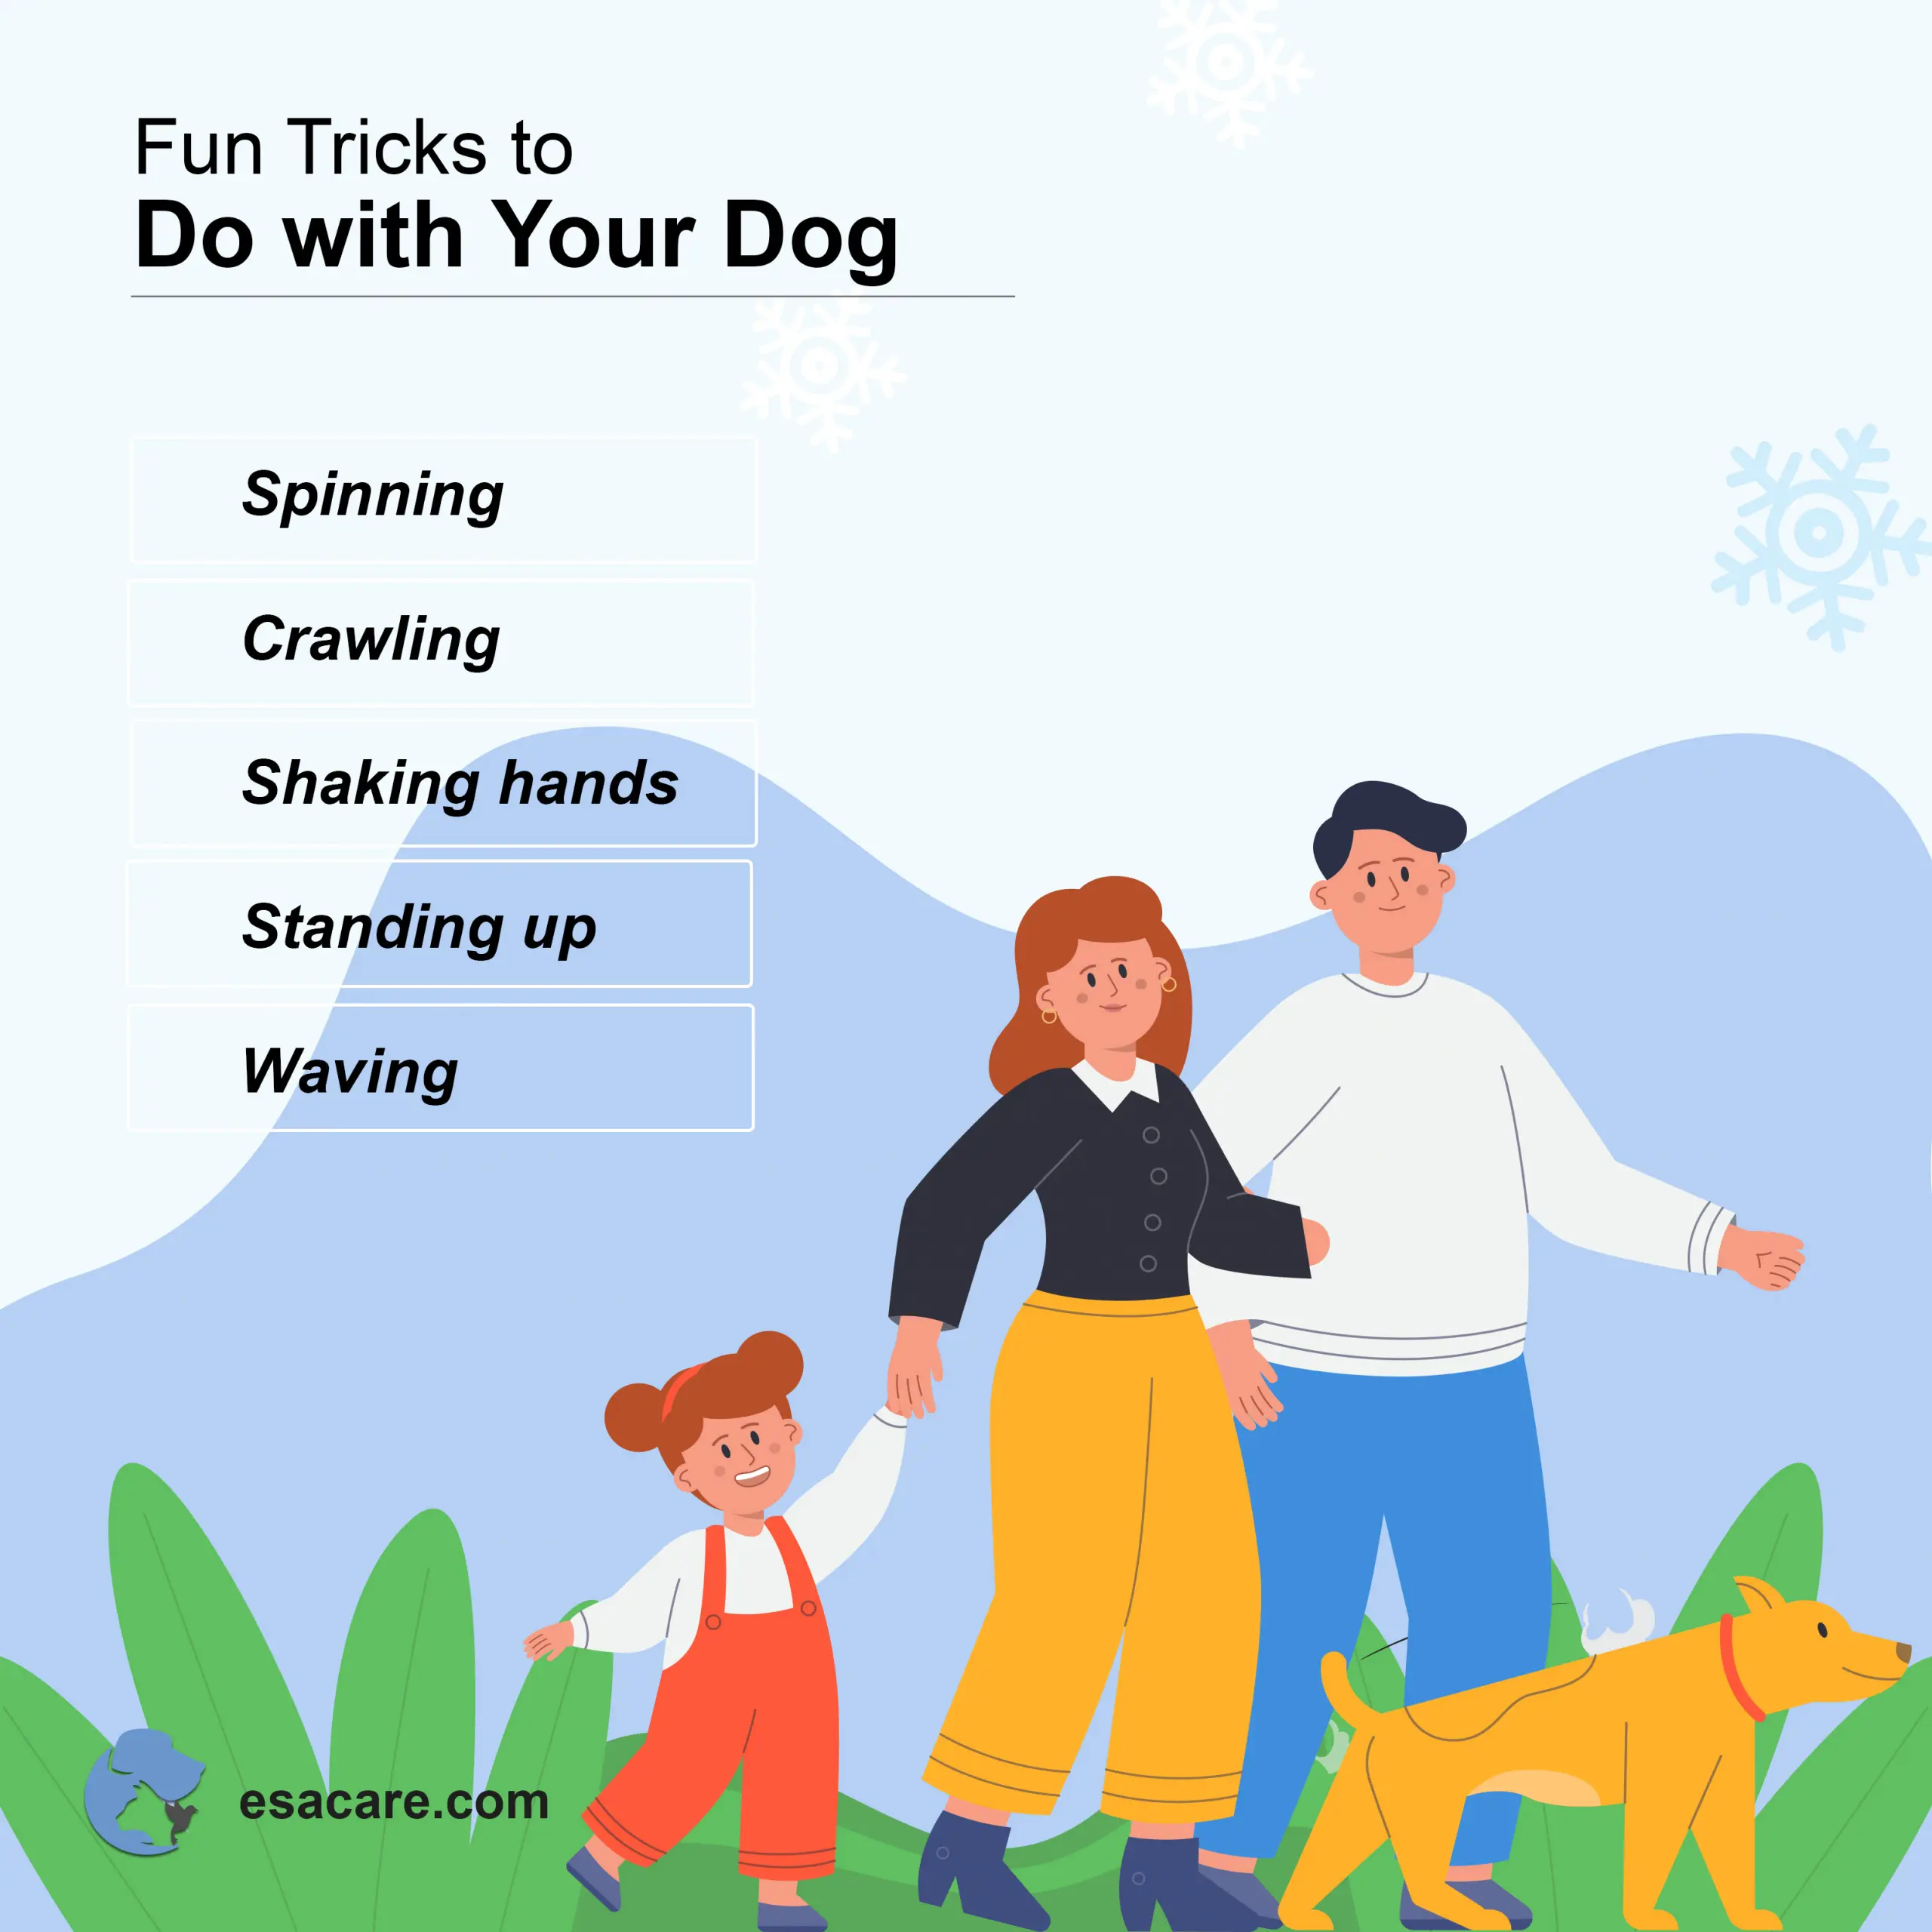 https://esacare.com/wp-content/uploads/2022/02/esacare_5-Activities-to-Keep-Your-Dog-Entertained-Indoors_image_2-scaled.jpg.webp